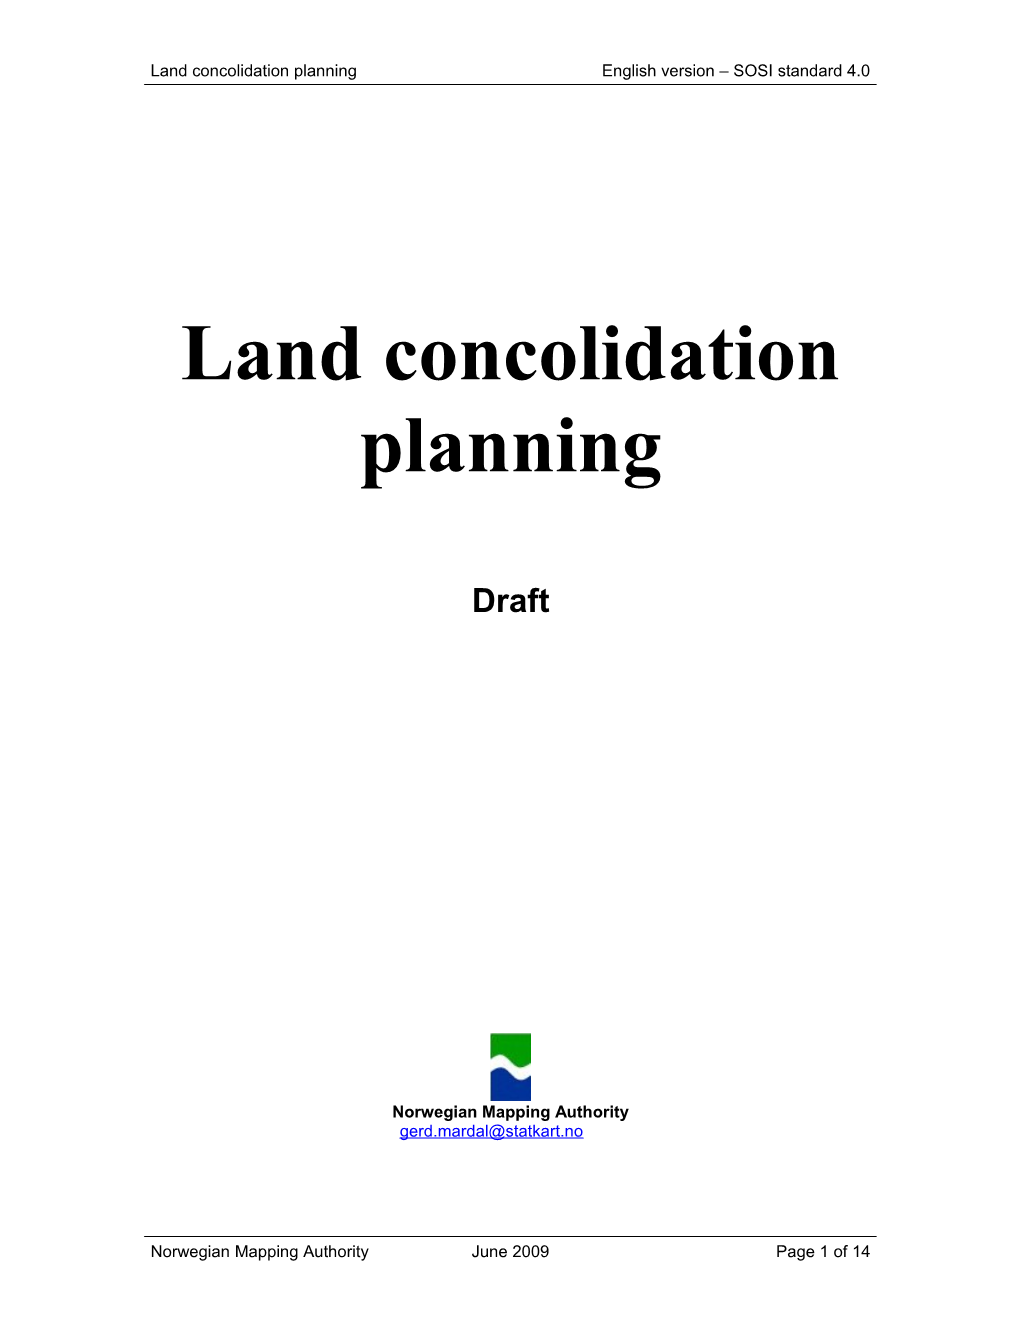 Land Concolidation Planning